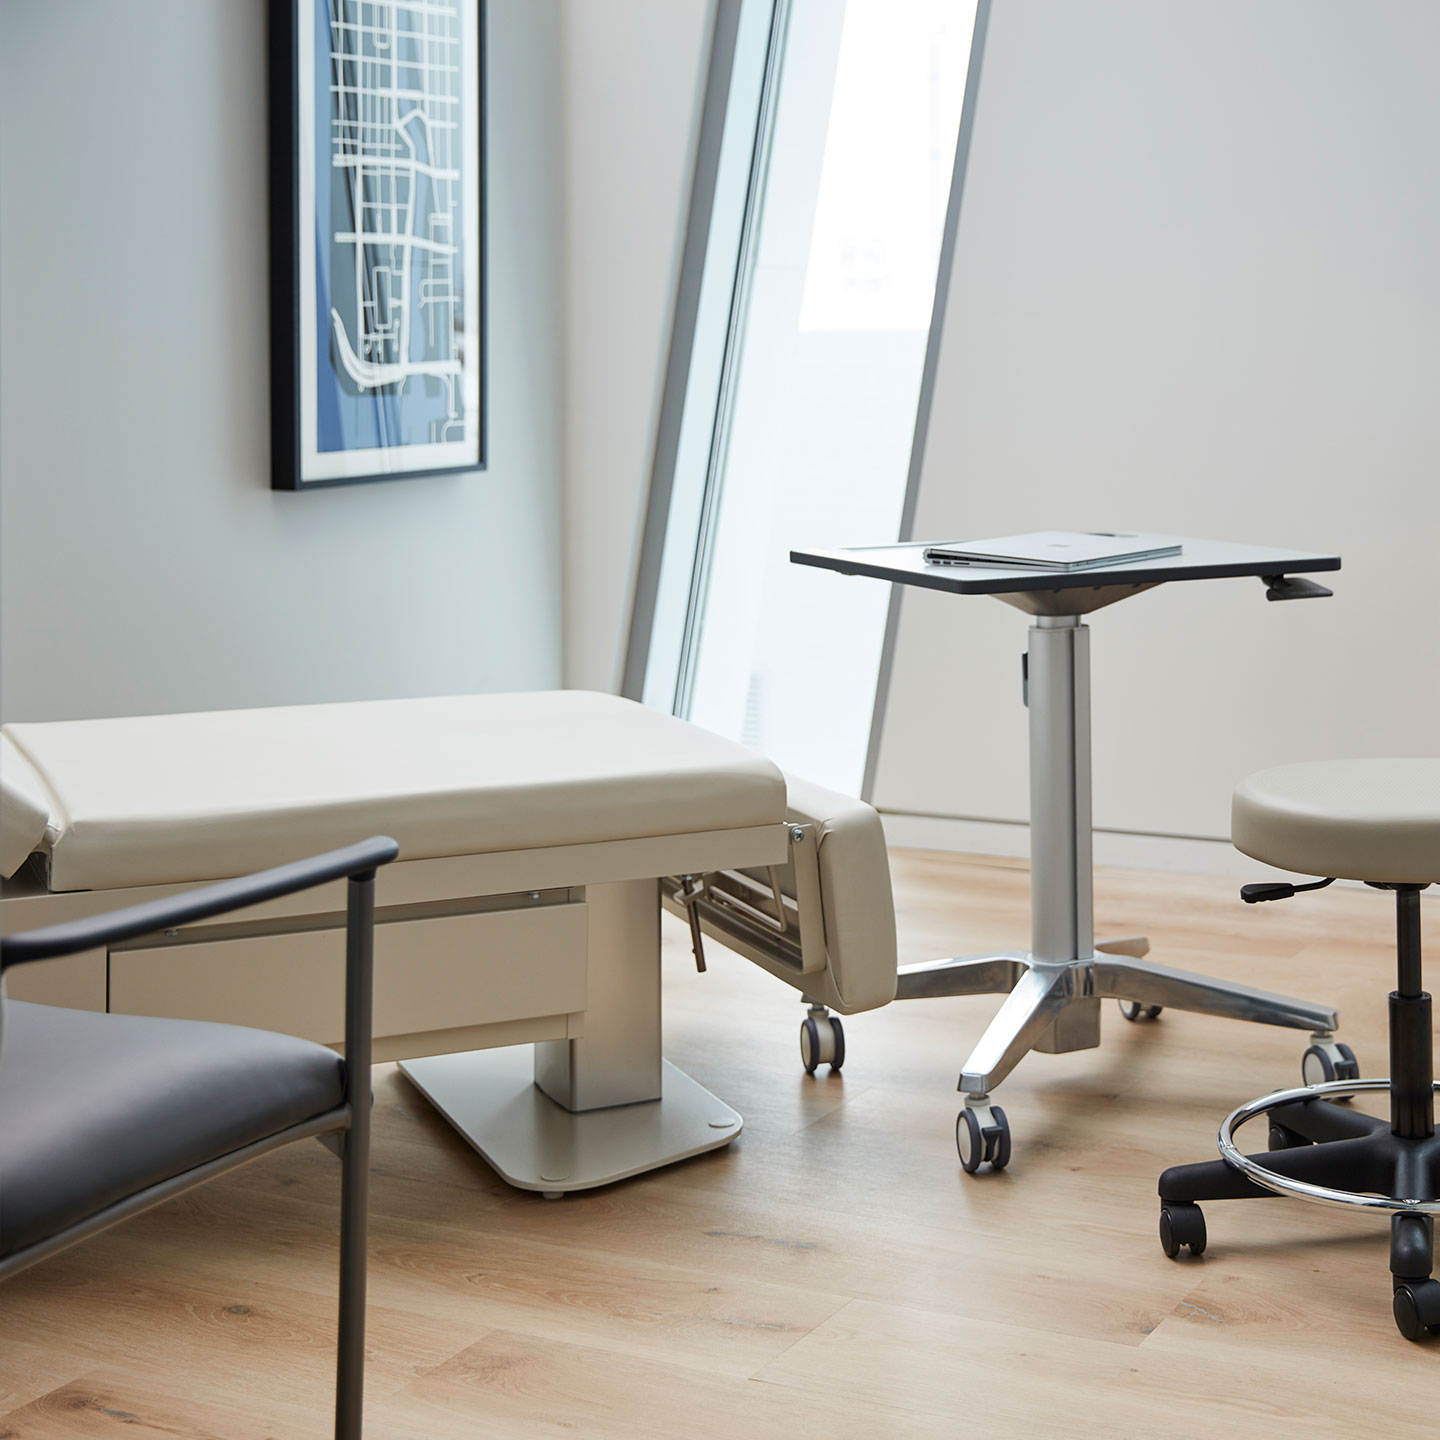 Haworth Power exam table with 2 height adjustable legs and a vinyl upholstery in an exam room with window